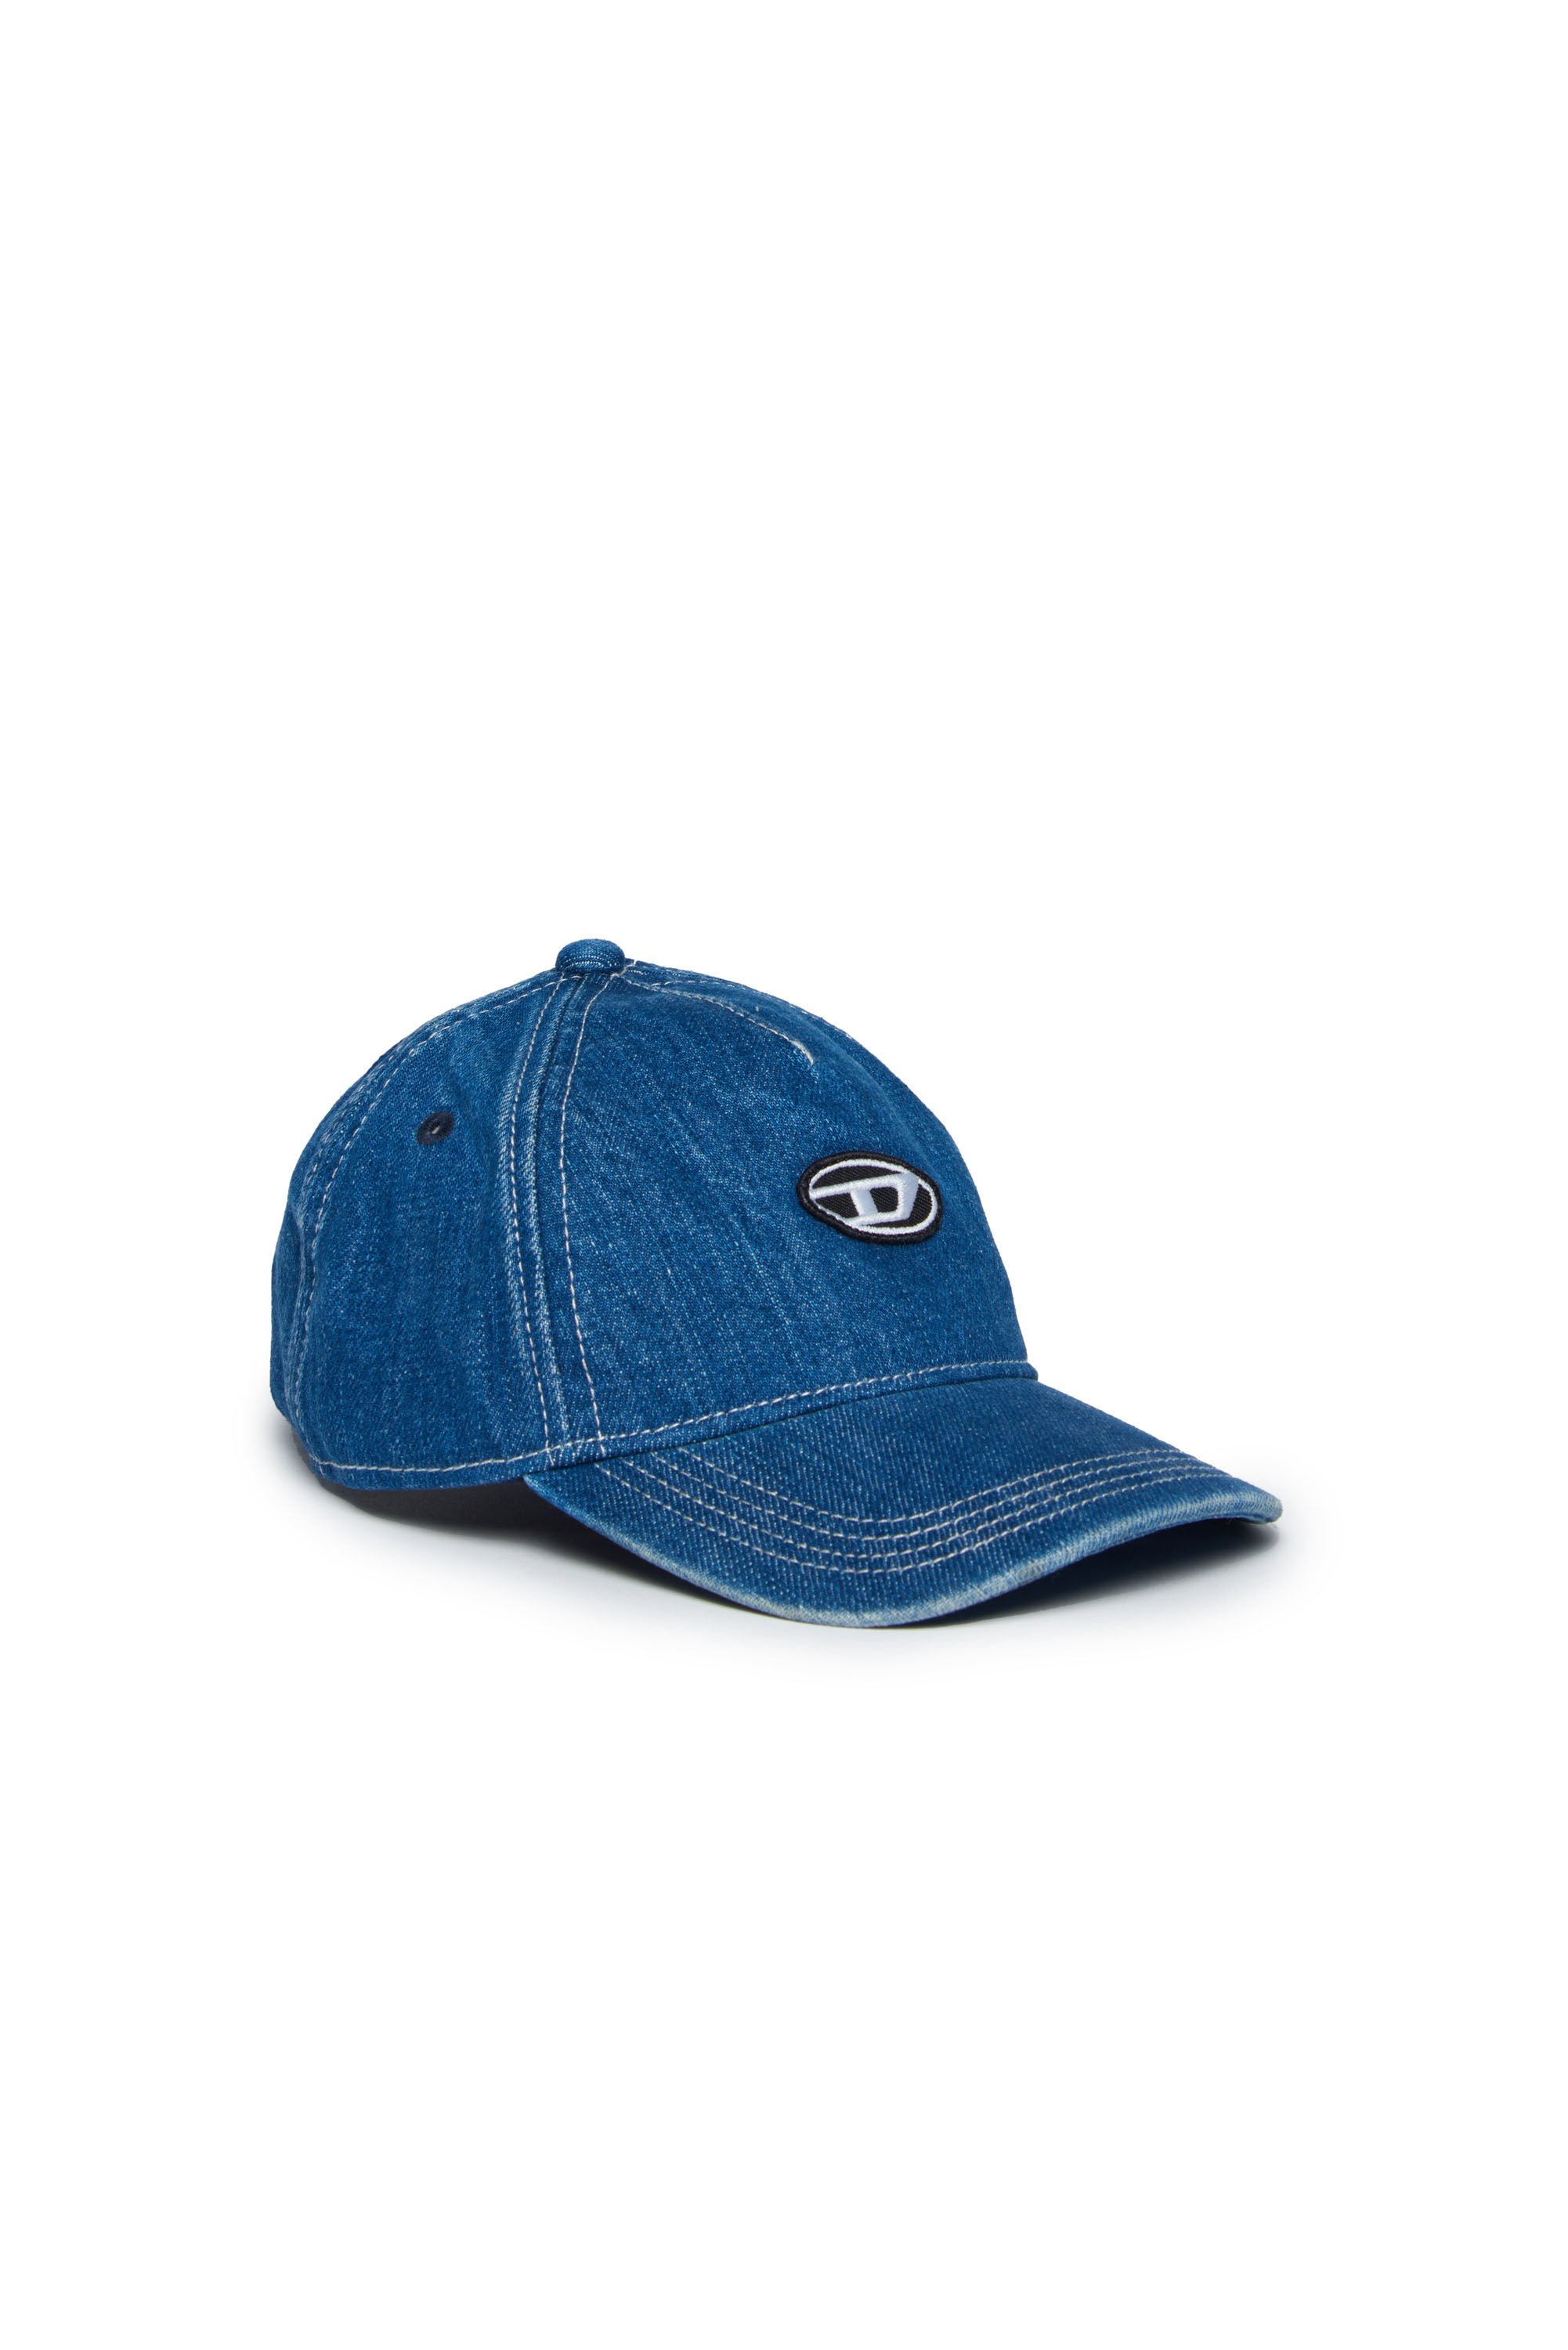 Diesel - FPOBIB, Man Denim baseball cap with Oval D patch in Blue - Image 1